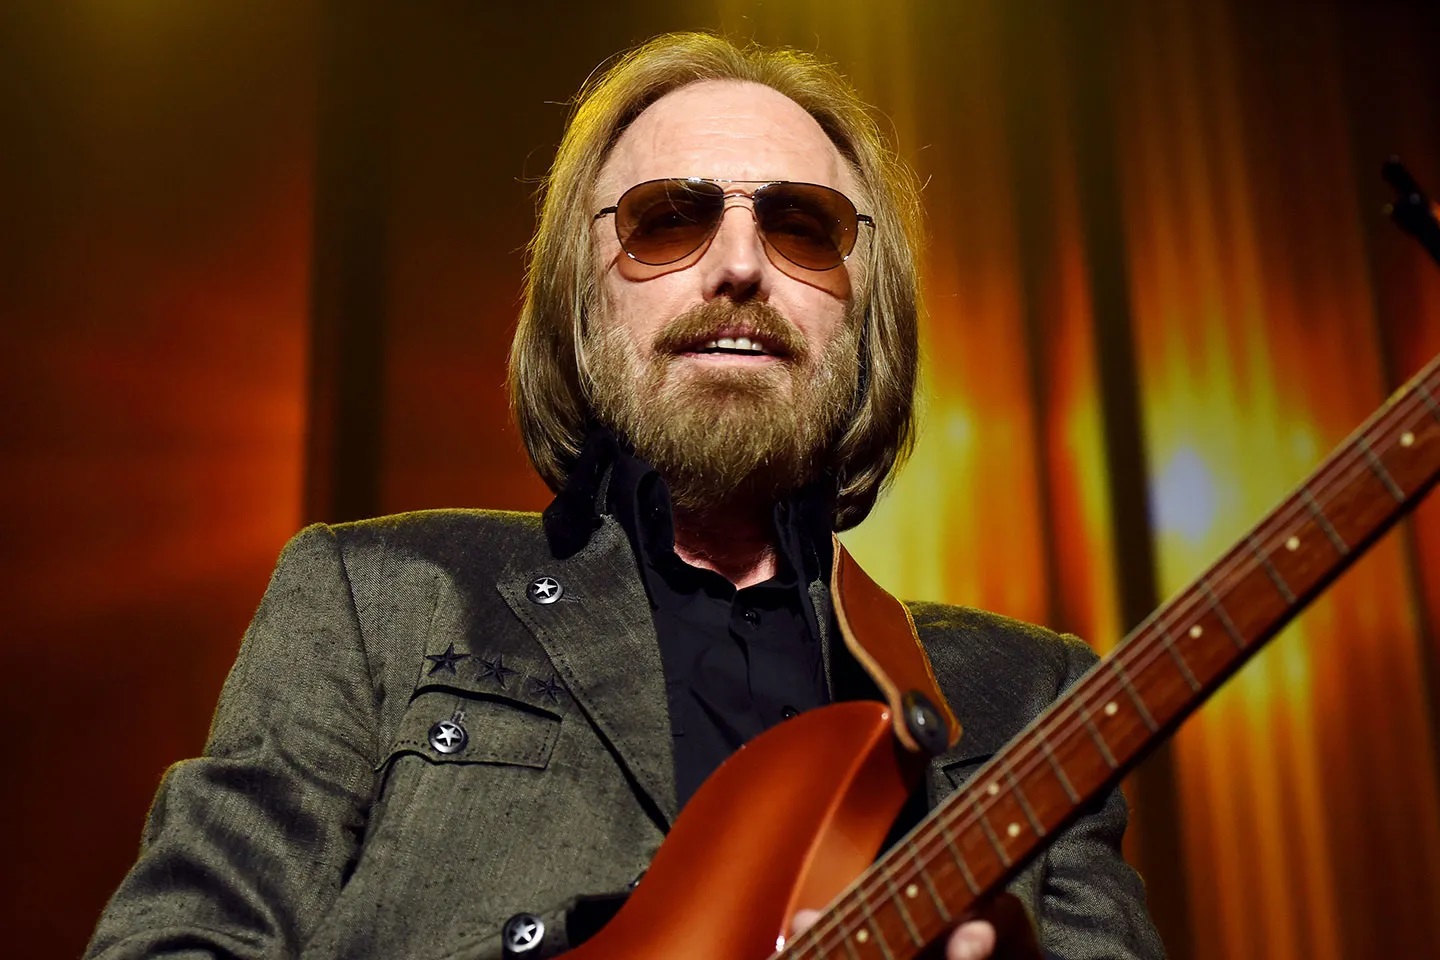 Tom Petty Auction Items Safely Returned To Family After Claims Of Theft